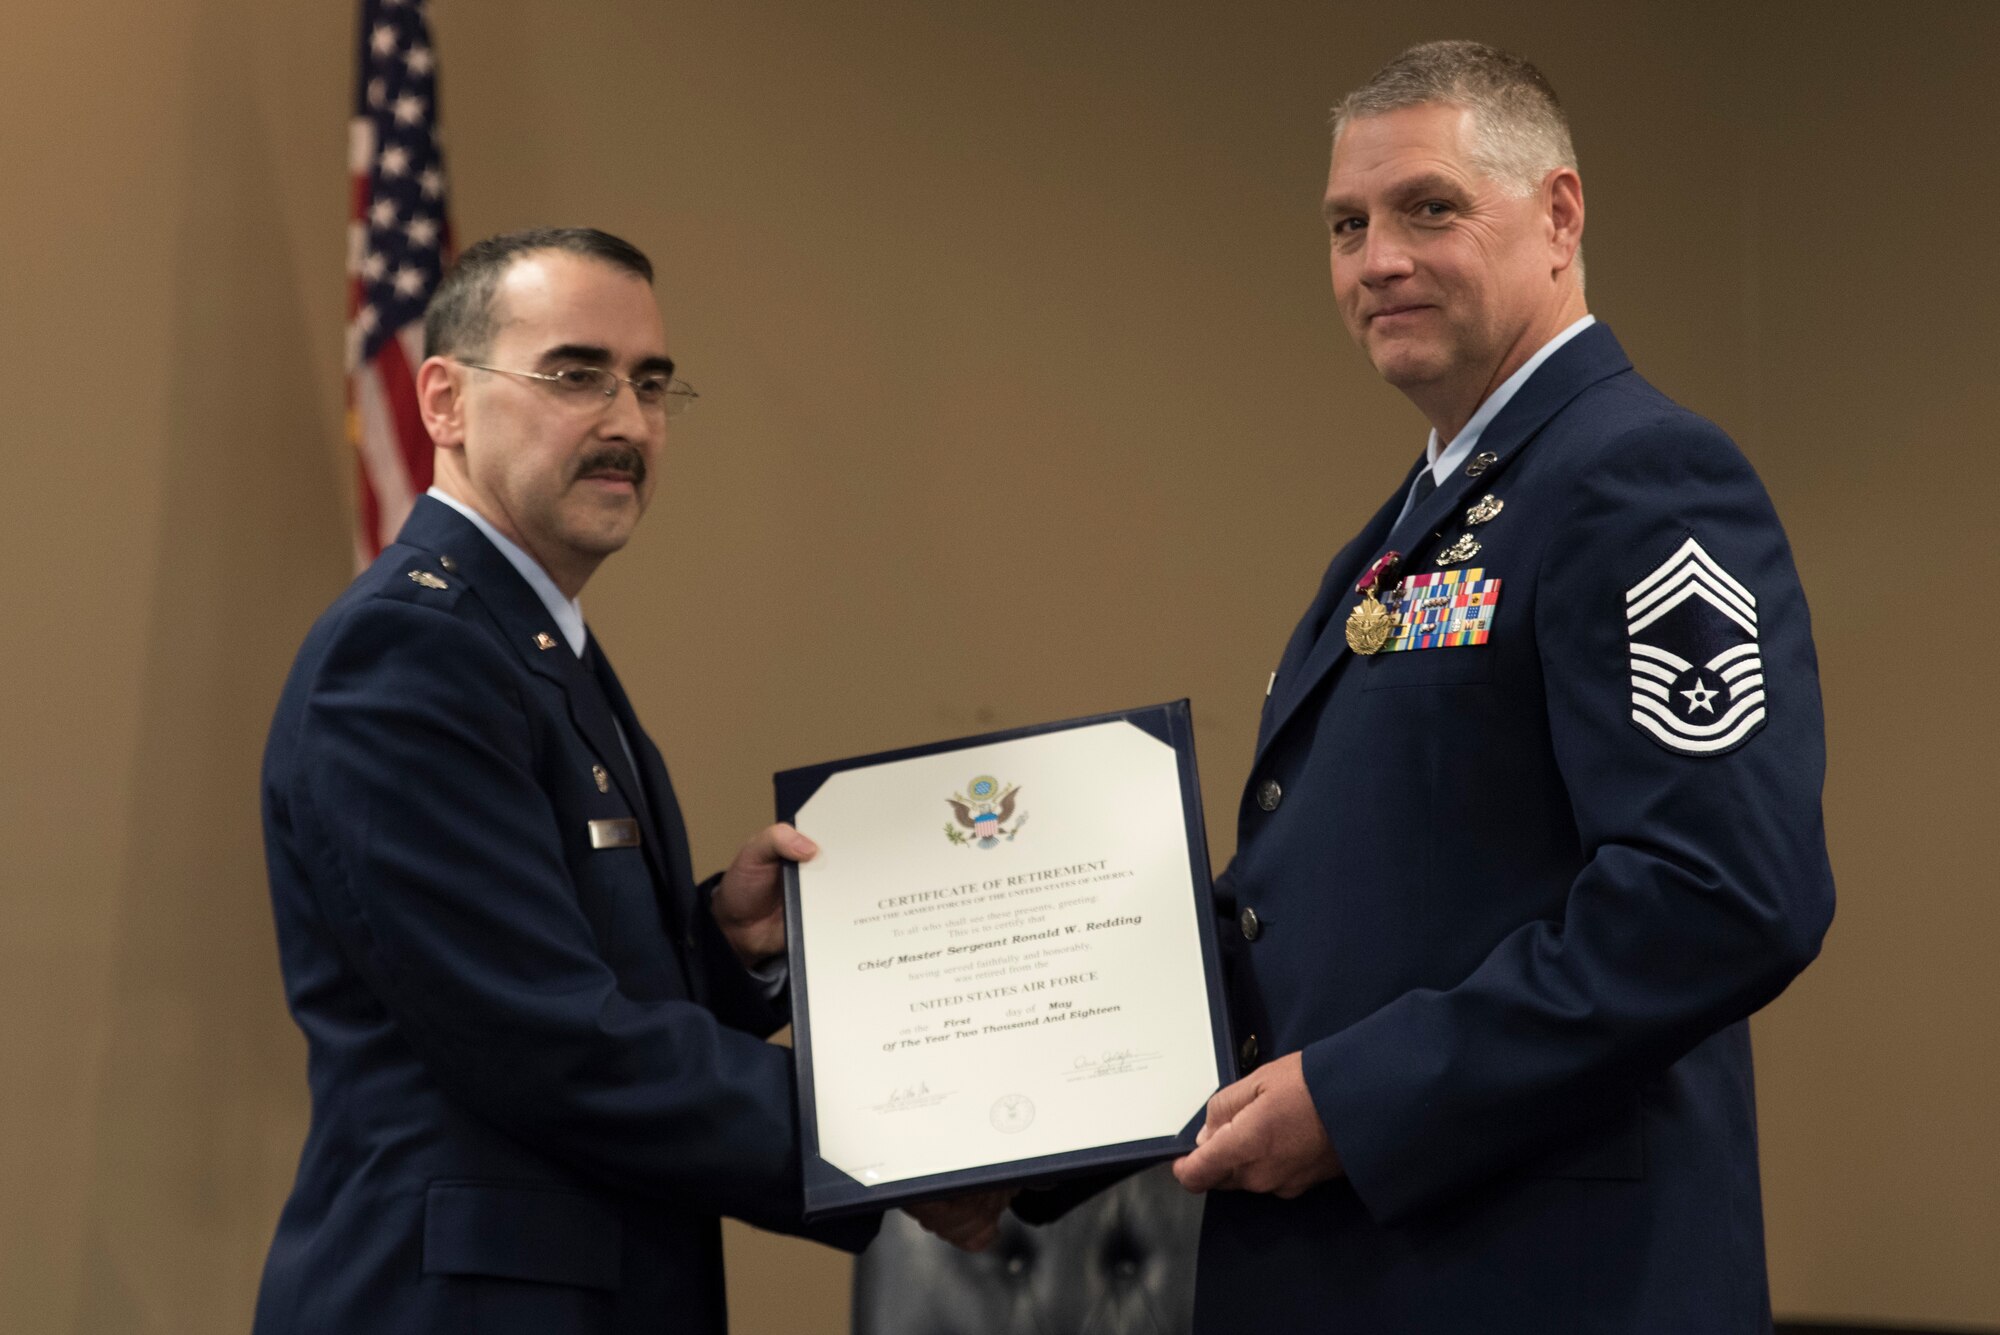 Lt. Col Micheal D. Howard, 188th Civil Engineering Commander, presents Cheif Master Sgt. Ronald W. Redding,188th Civil Engineering Squadron Emergency Management Chief, with the Certificate of Retirement during Cheif Redding's retirement ceremony at Fort Smith, AR., Apr. 07, 2018. (U.S. Air National Guard photo by Tech. Sgt. Daniel Condit)